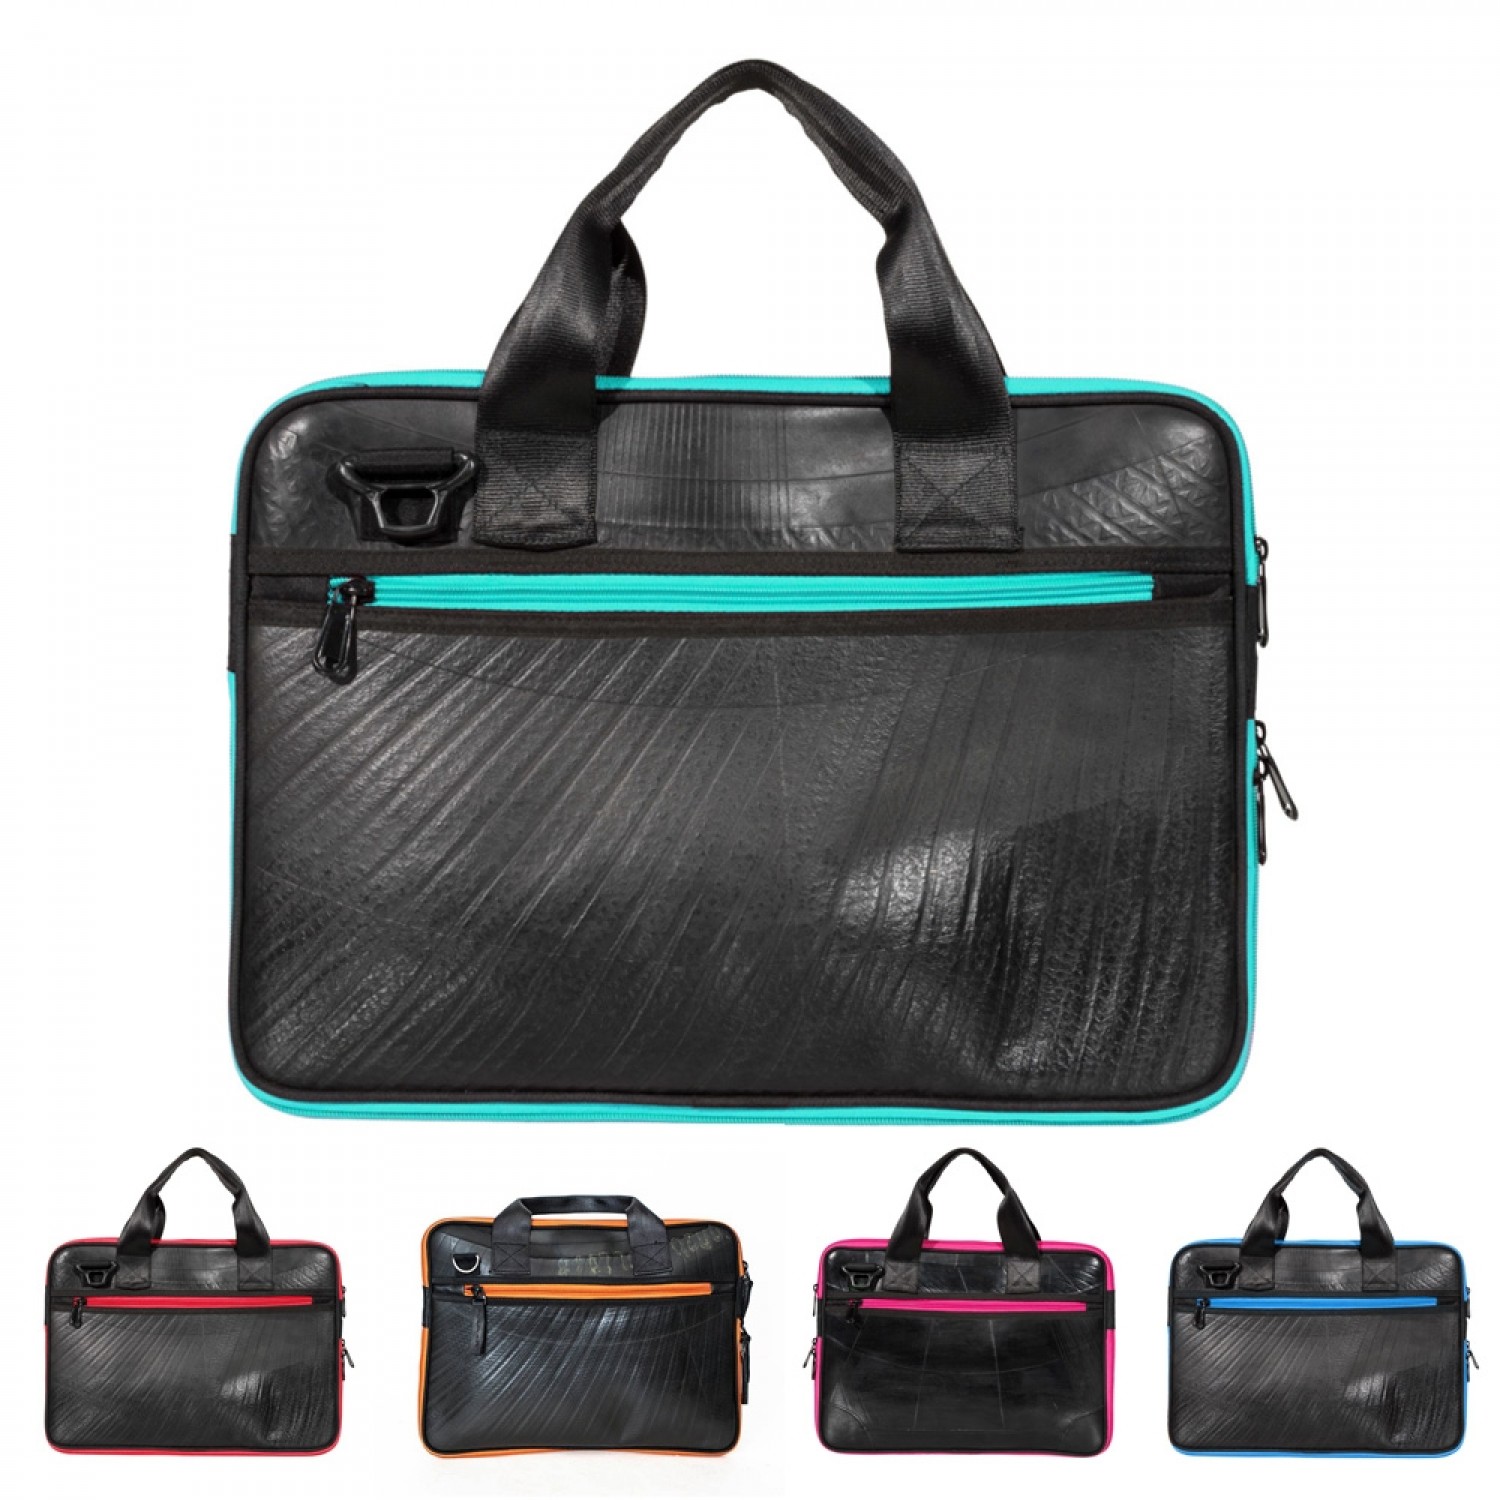 Ecowings Panther Laptop Bag - upcycled Shoulder Bag